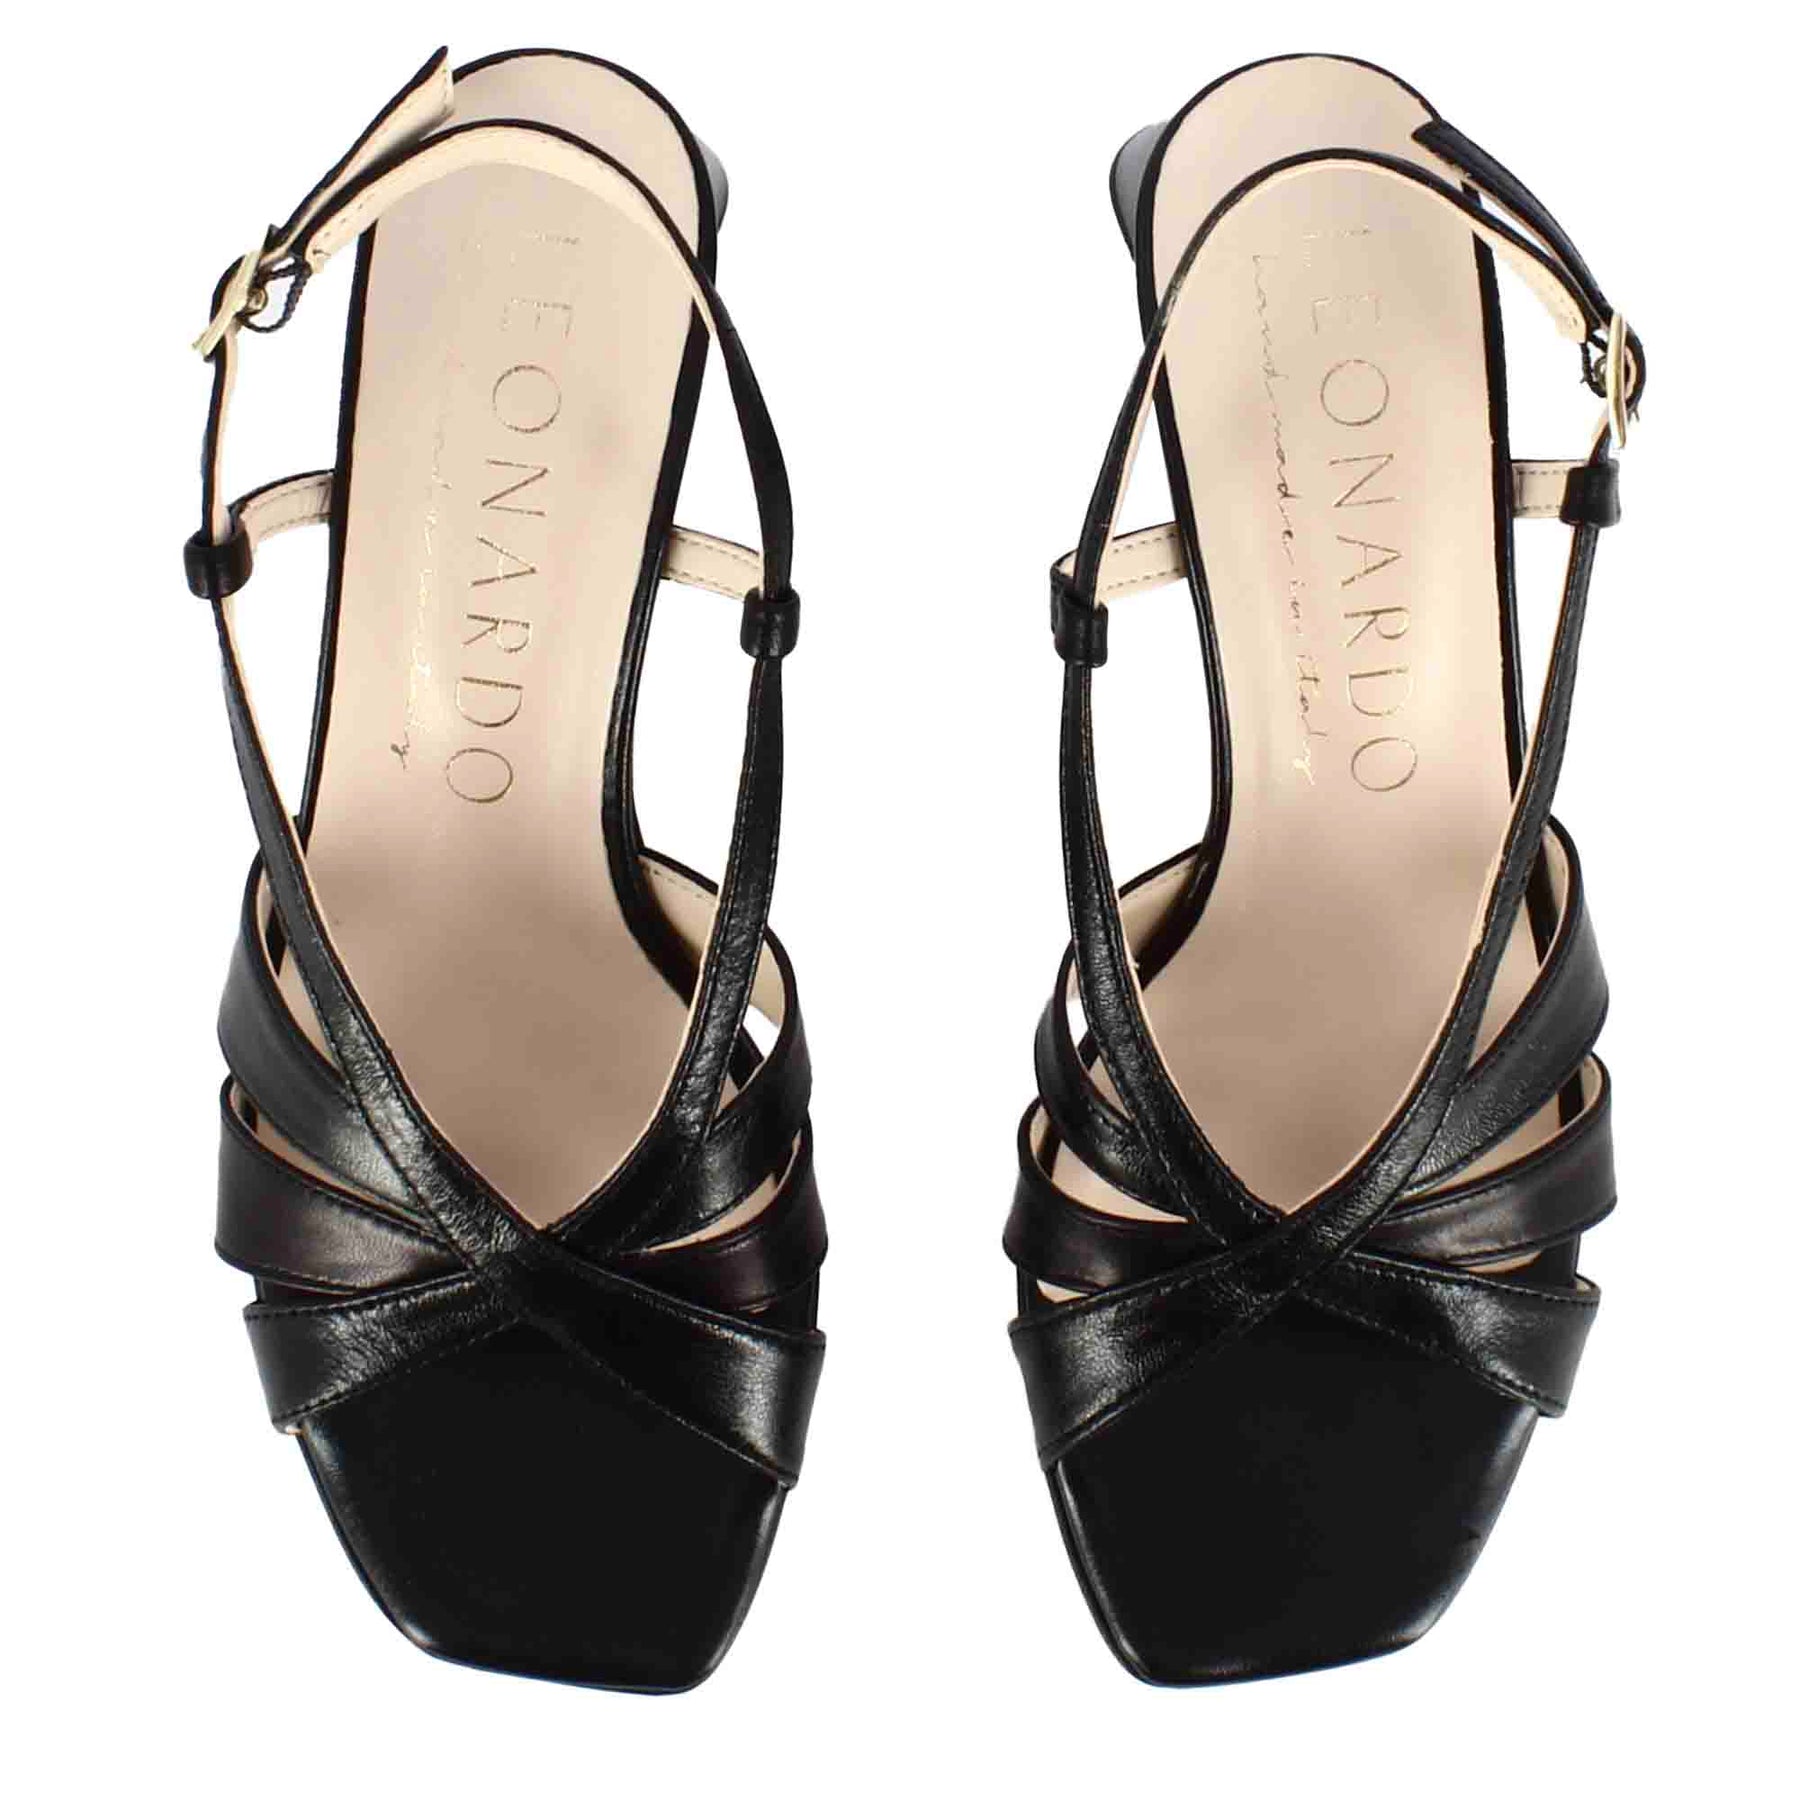 Classic black leather women's sandal with straps